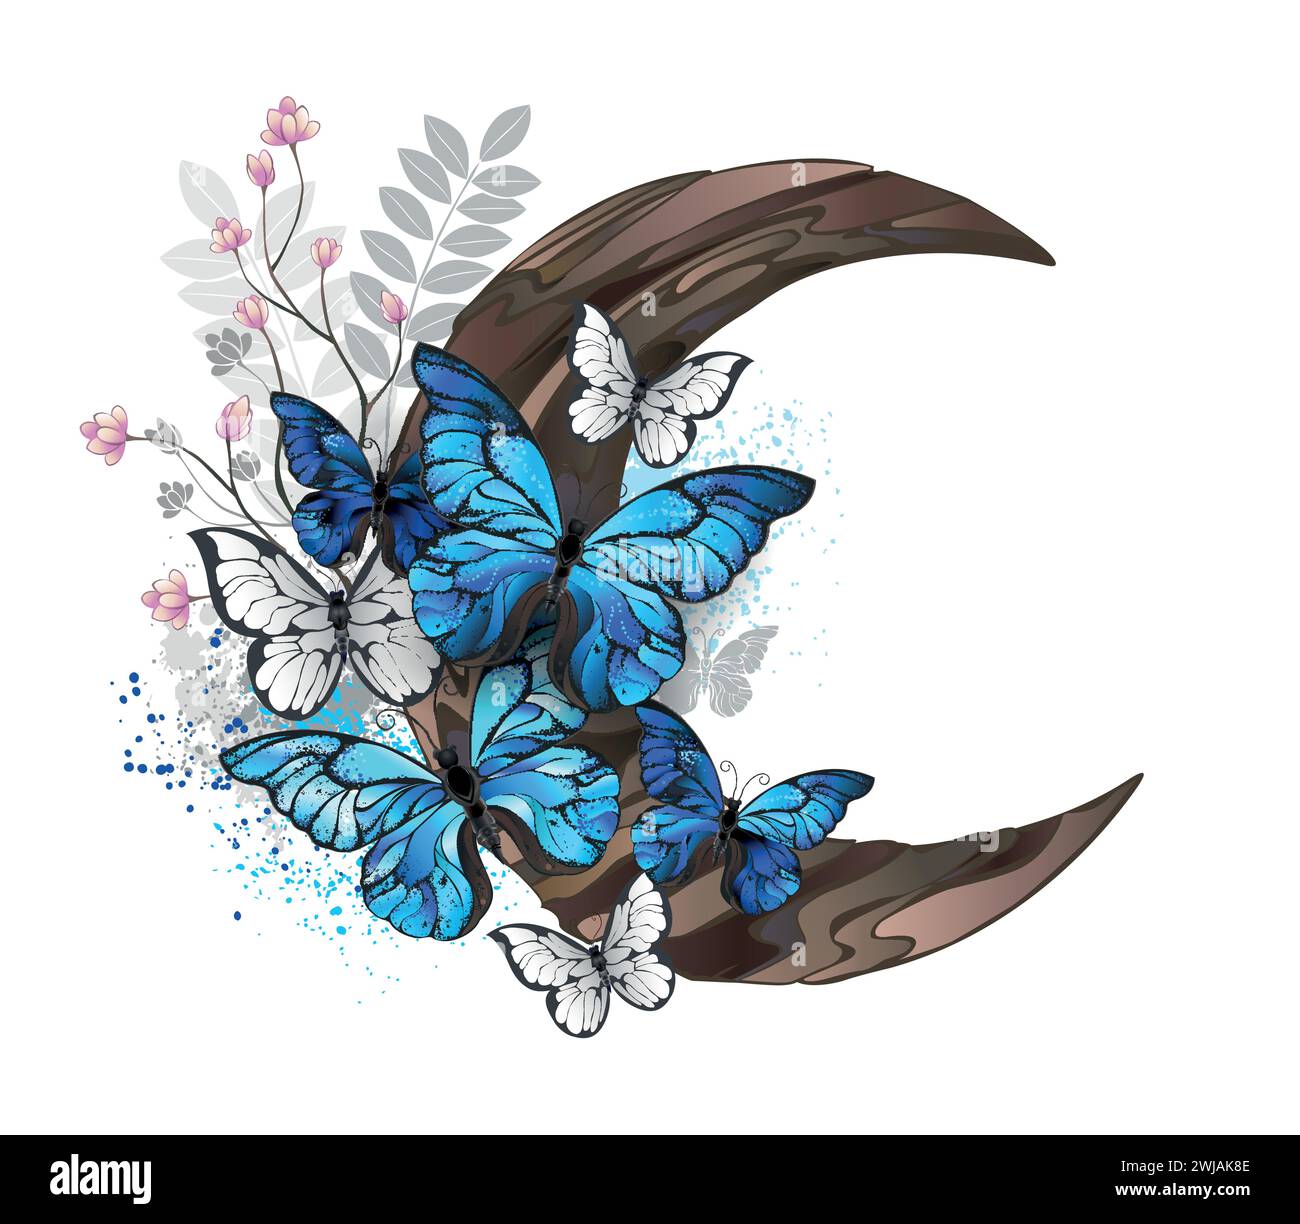 Blue morpho butterflies with detailed wings sit on wooden crescent decorated with wild plants on white background. Blue butterflies morpho. Stock Vector